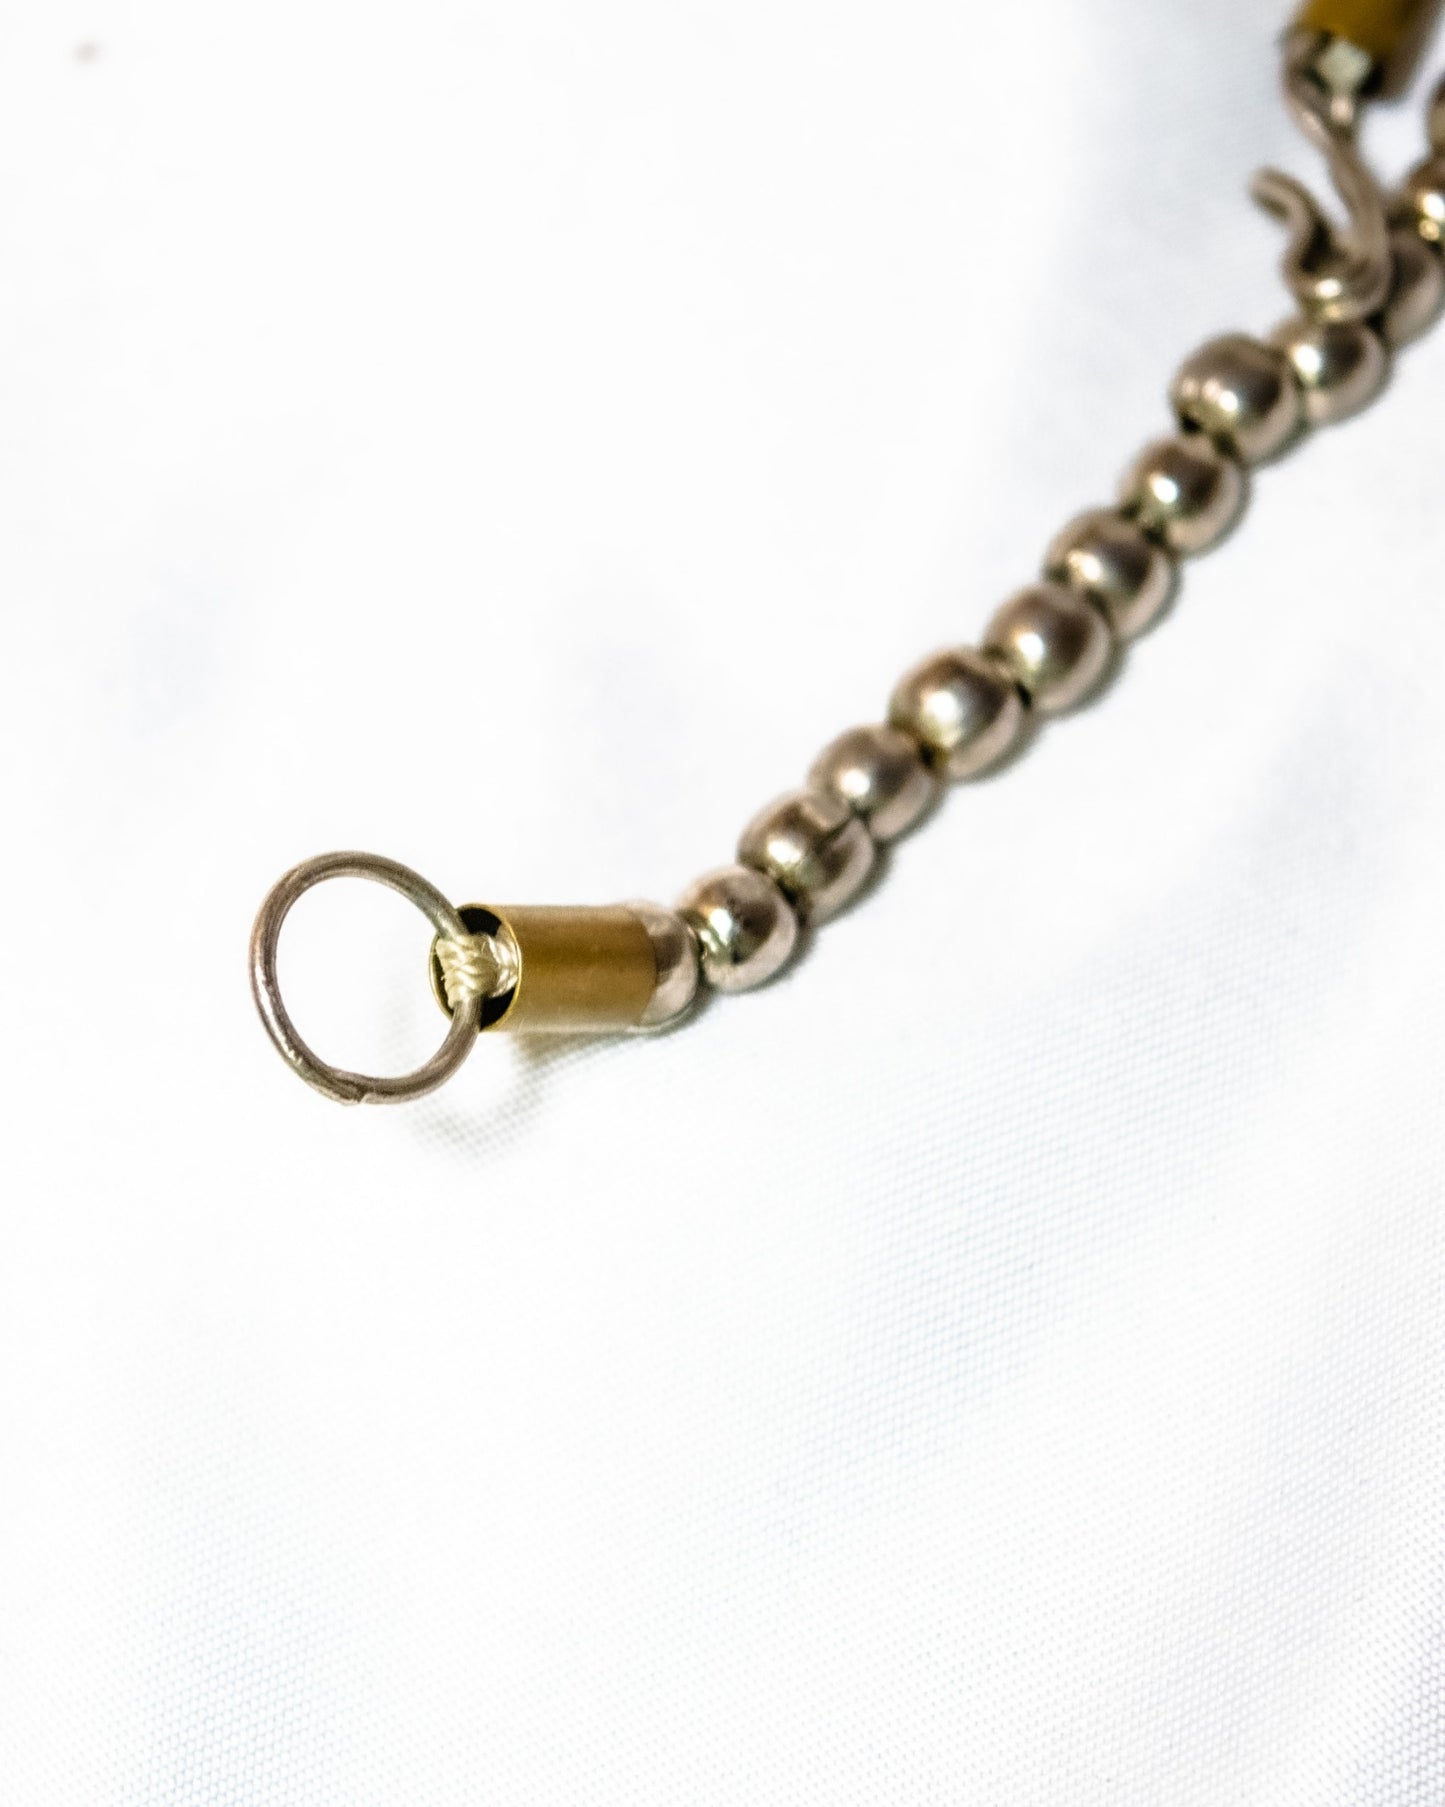 Thick iron chain necklace